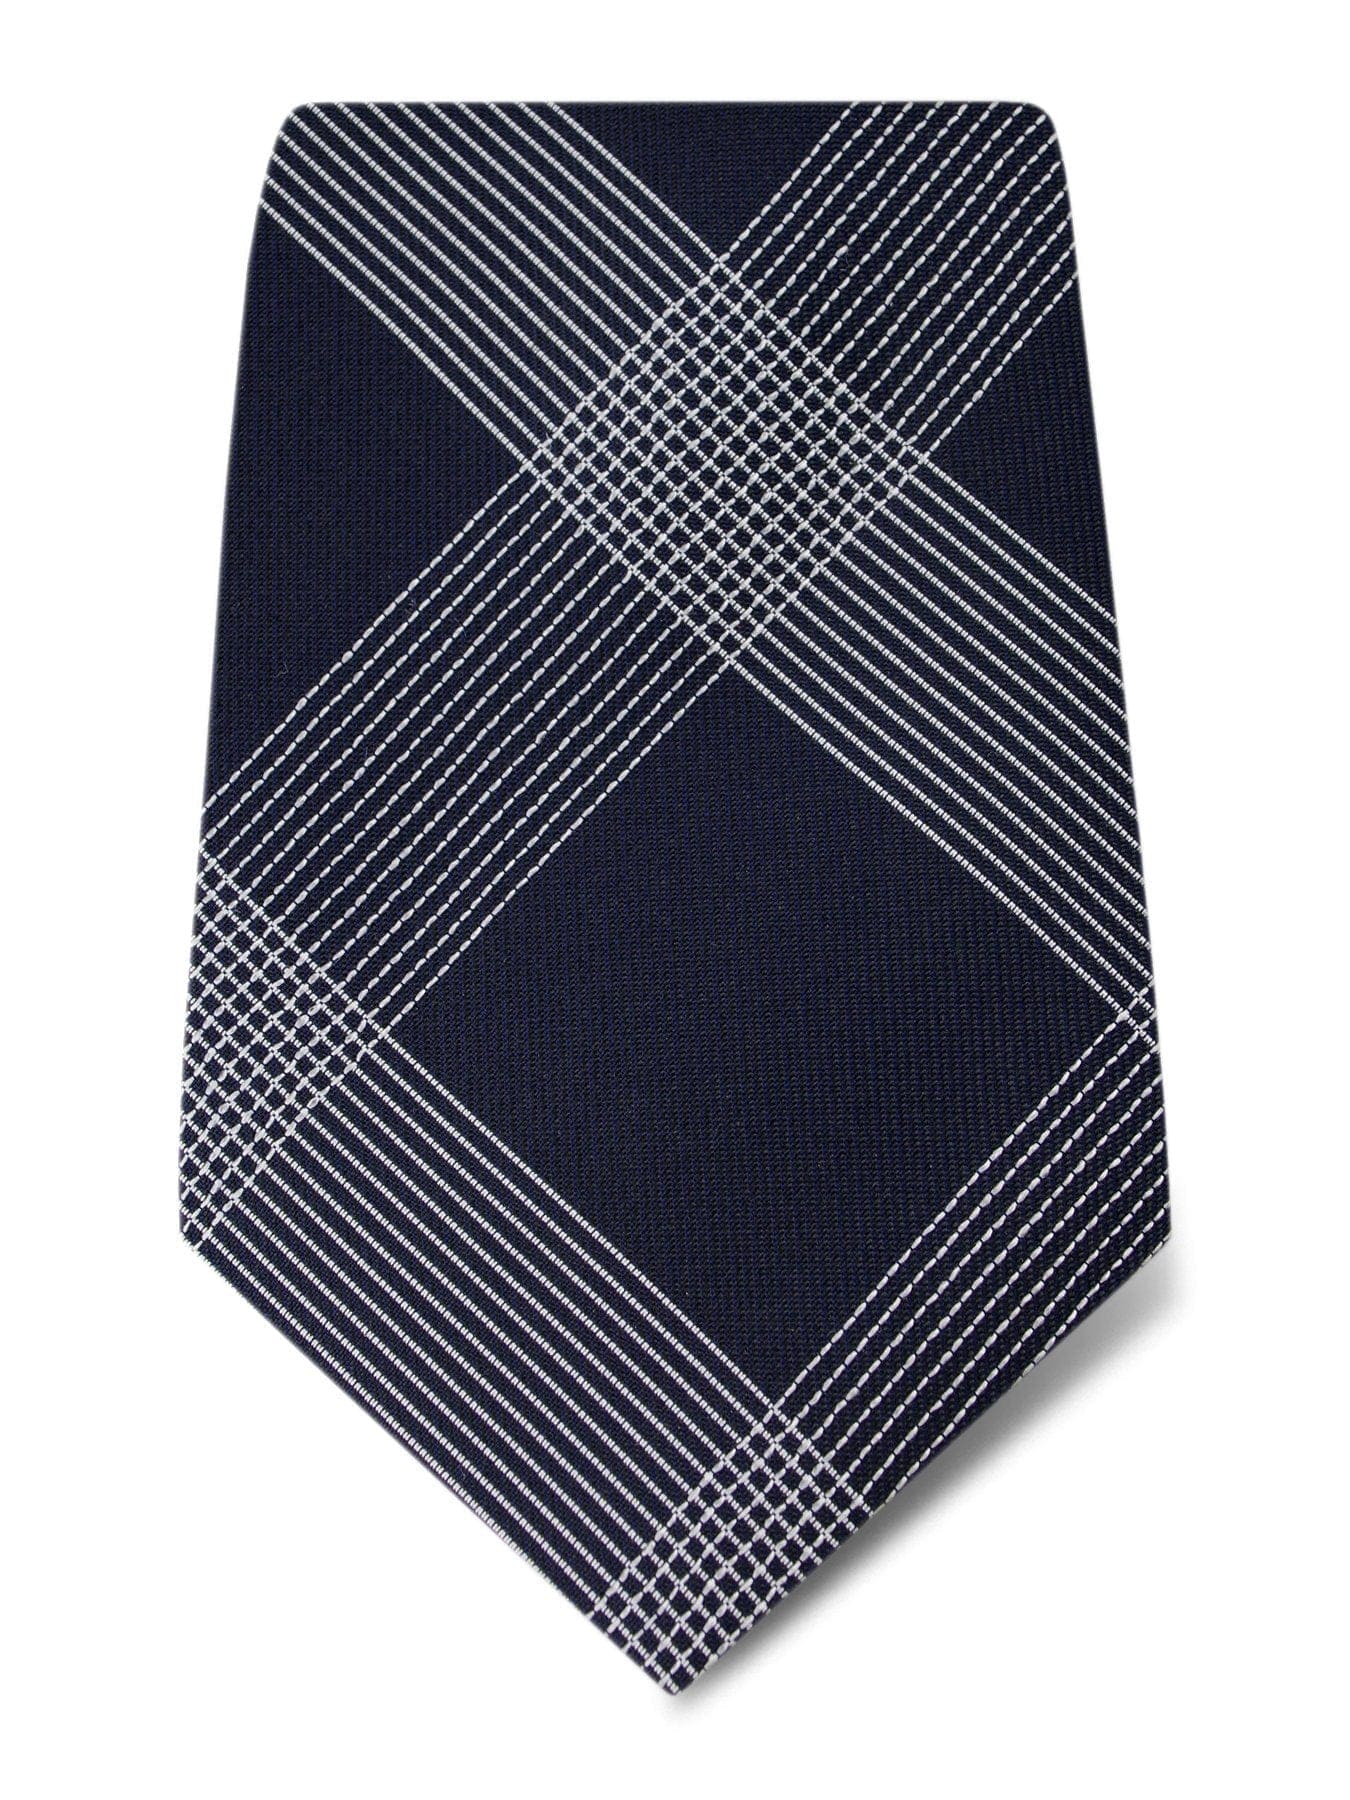 Navy with White Check Woven Silk Tie